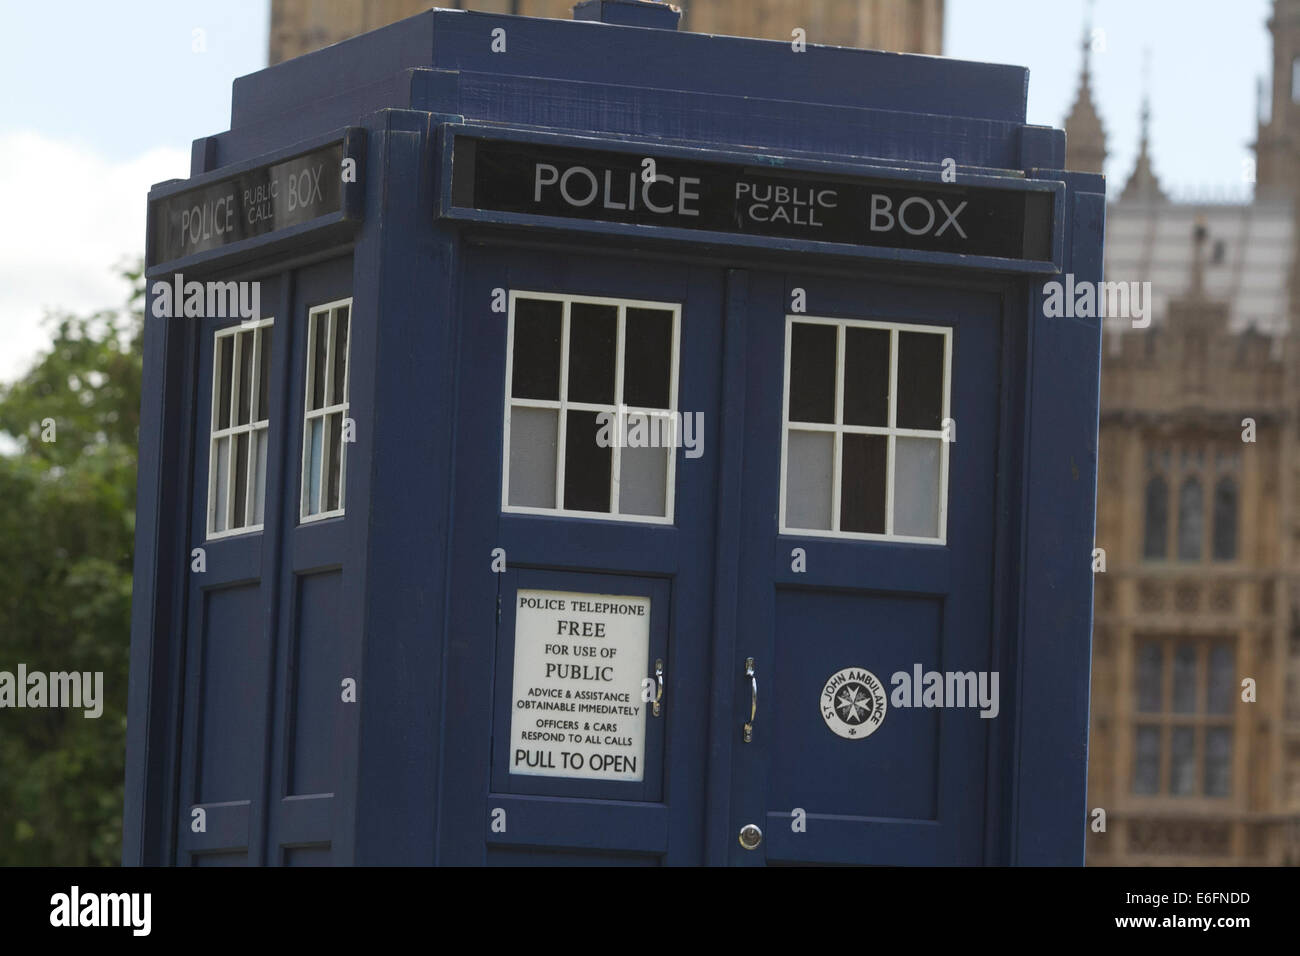 London,UK. 22nd August 2014. Dr Who Tardis appears in Parliament square to launch the new BBC sci fi series on August 23 featuring Peter Capaldi as the 12th Dr Who Credit:  amer ghazzal/Alamy Live News Stock Photo